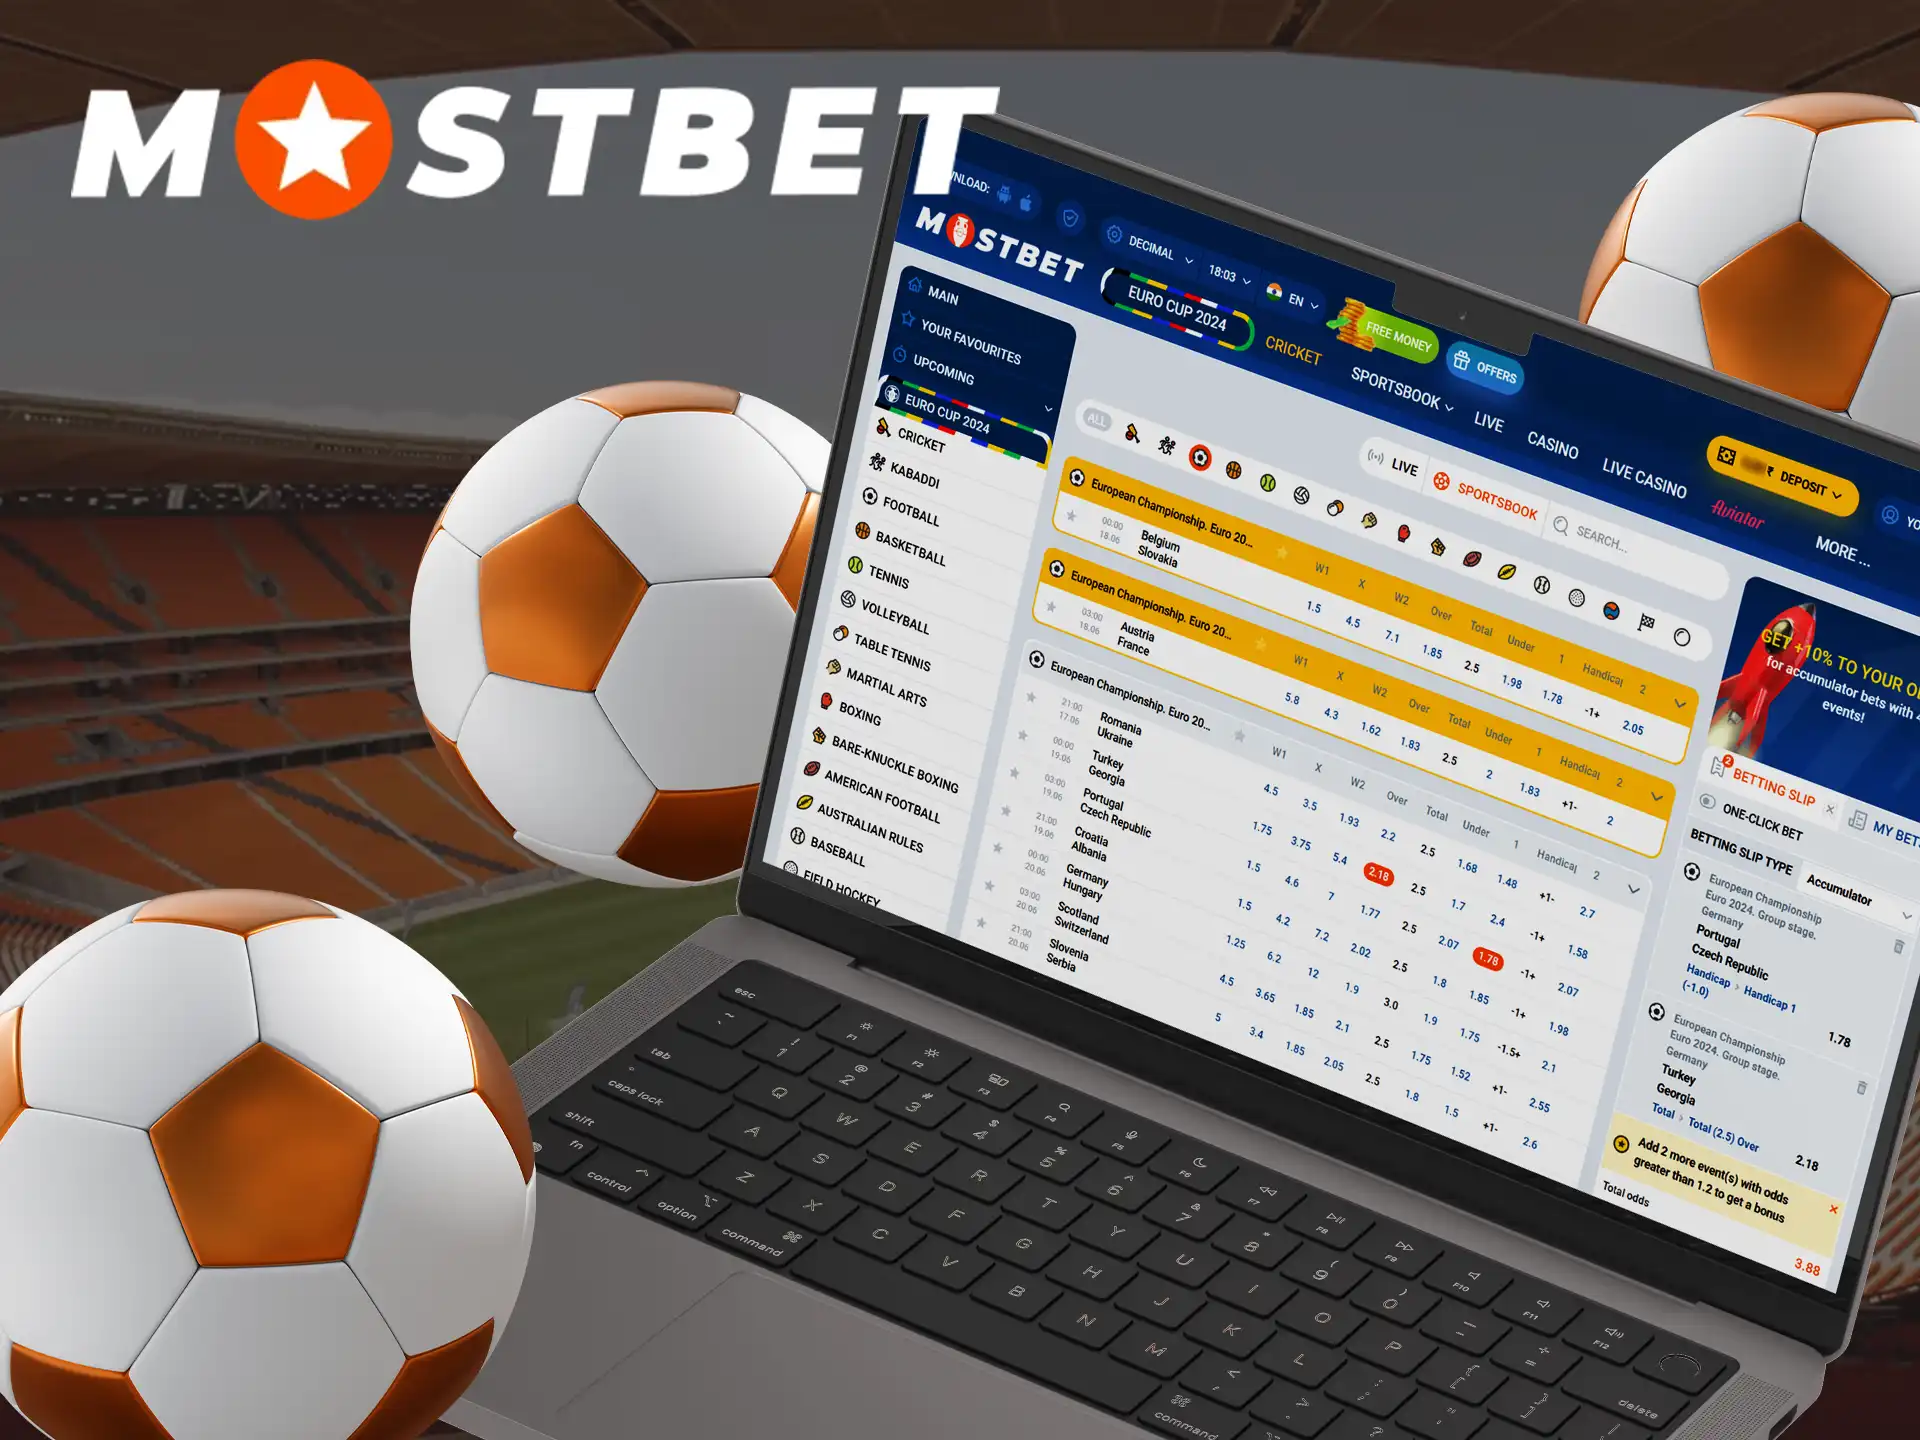 Mostbet is one of the most trusted and popular football betting platforms in India.